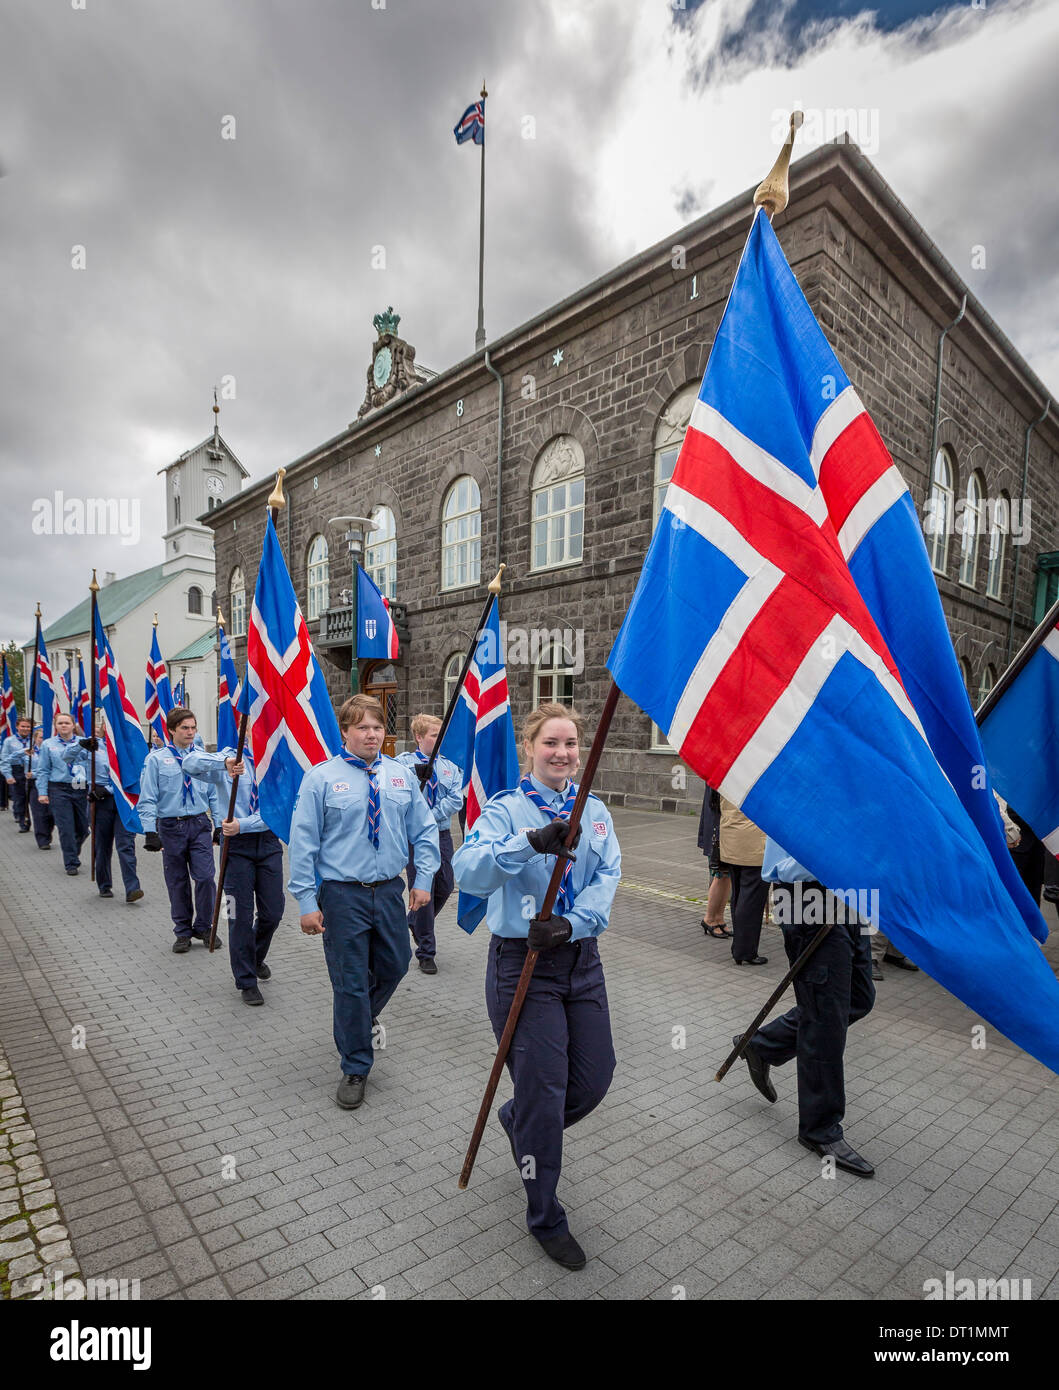 Scouts in parade on June 17th, Iceland's Independence Day.  Reykjavik, Iceland Stock Photo